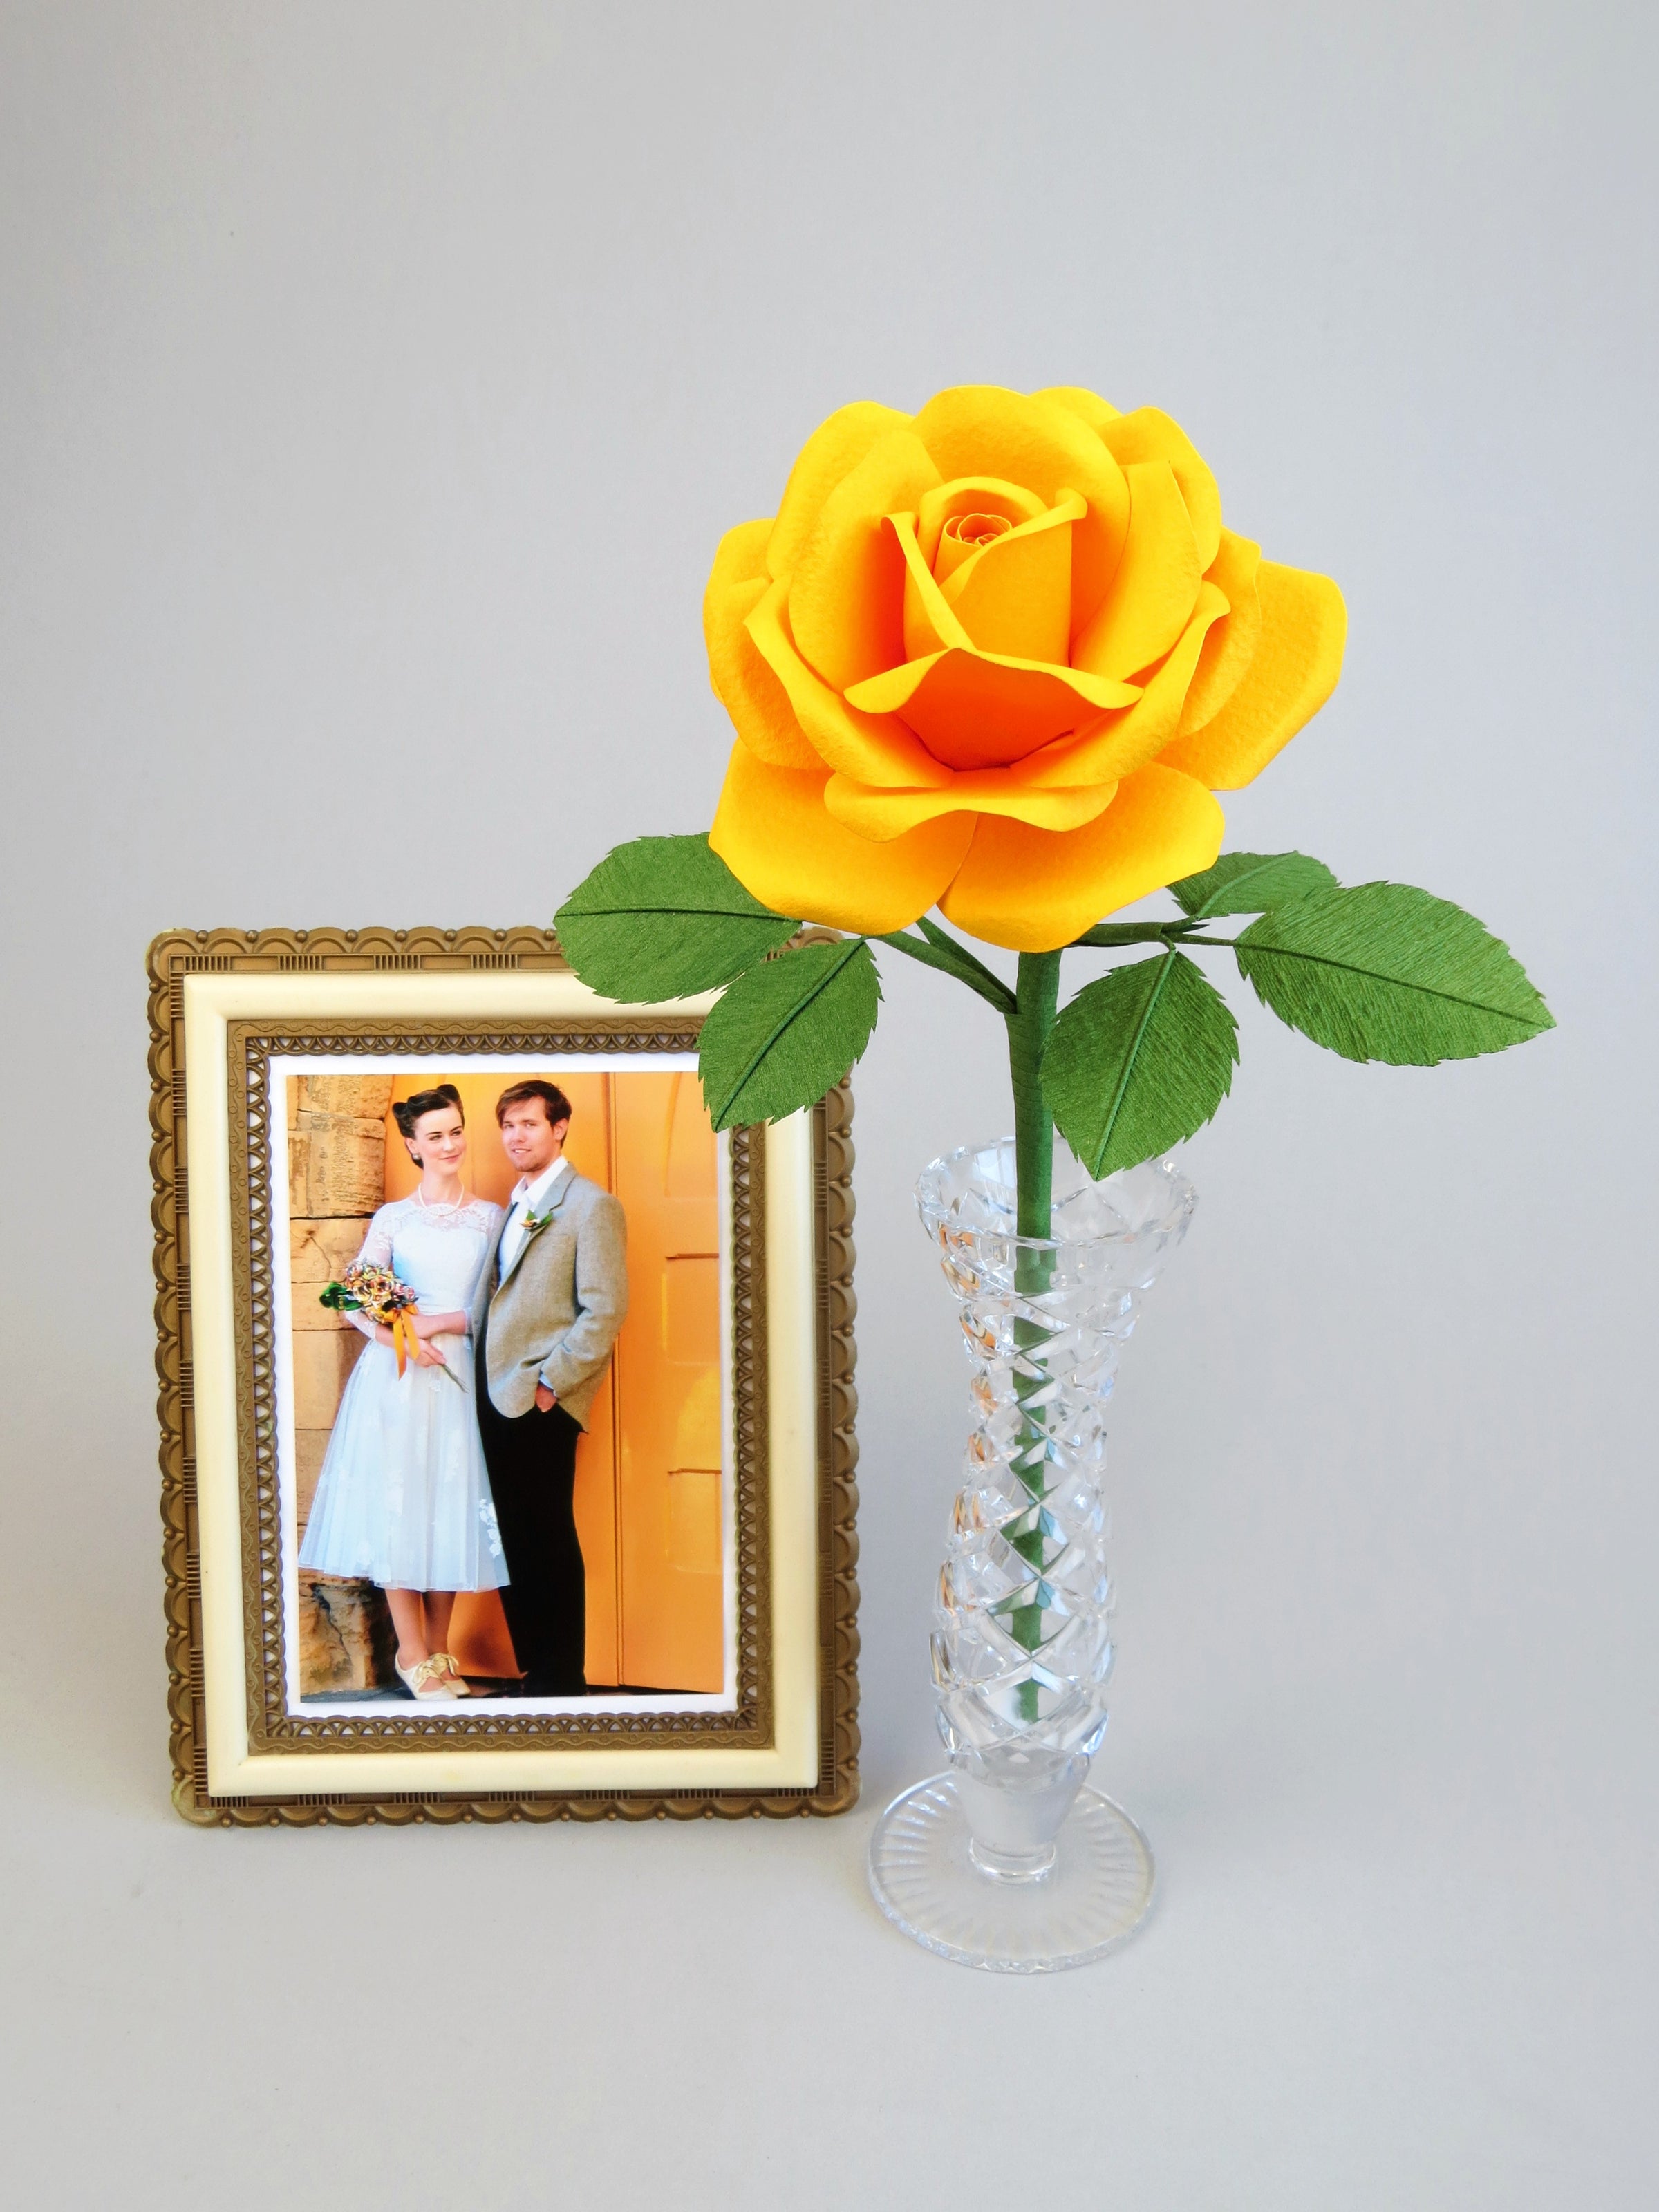 Yellow cotton paper rose with six green leaves standing in a slender glass vase with a framed vintage wedding photo of a happy couple standing beside it against a grey background